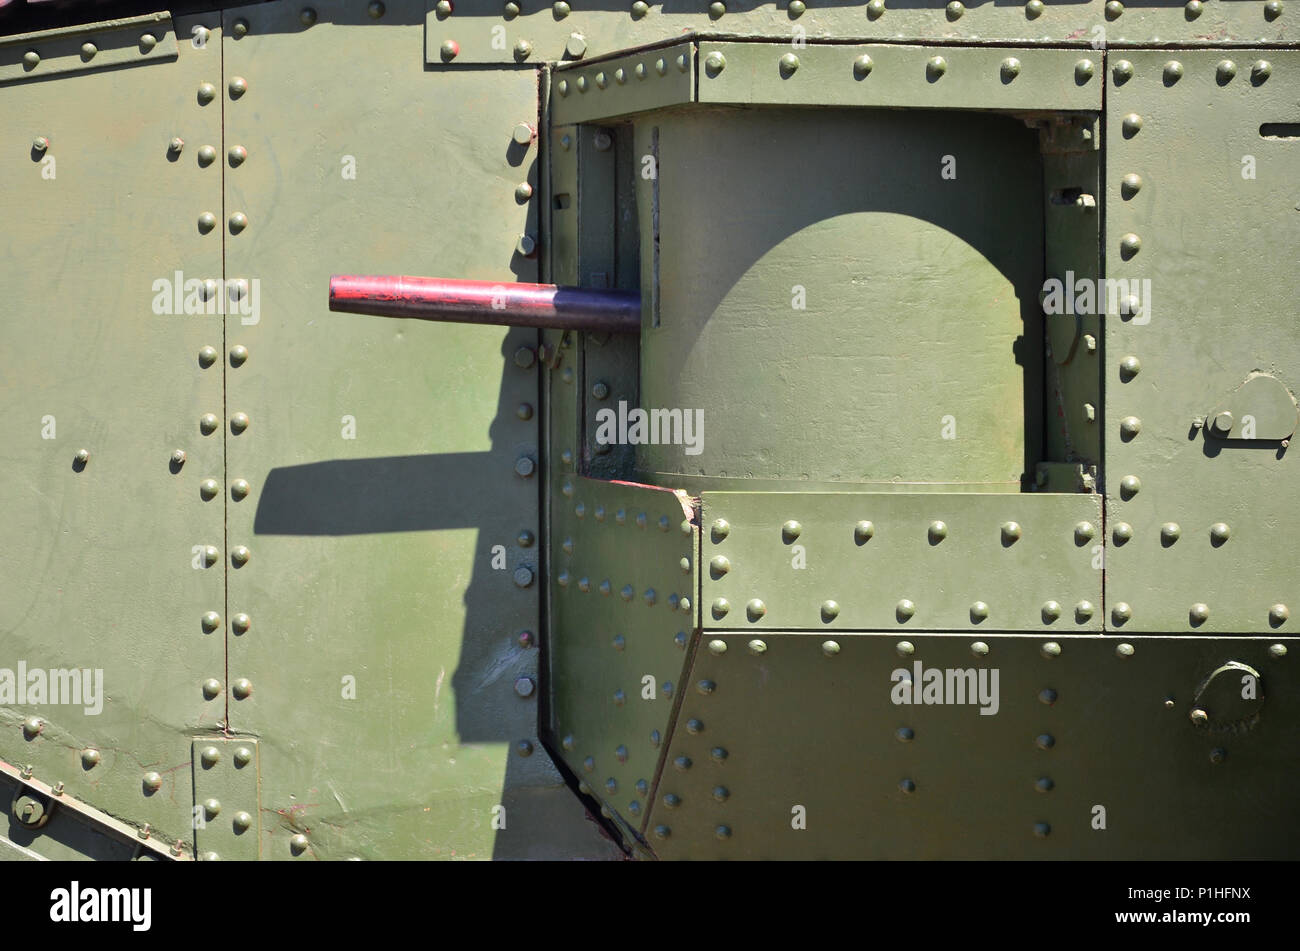 The texture of the wall of the tank, made of metal and reinforced with a multitude of bolts and rivets. Images of the covering of a combat vehicle fro Stock Photo